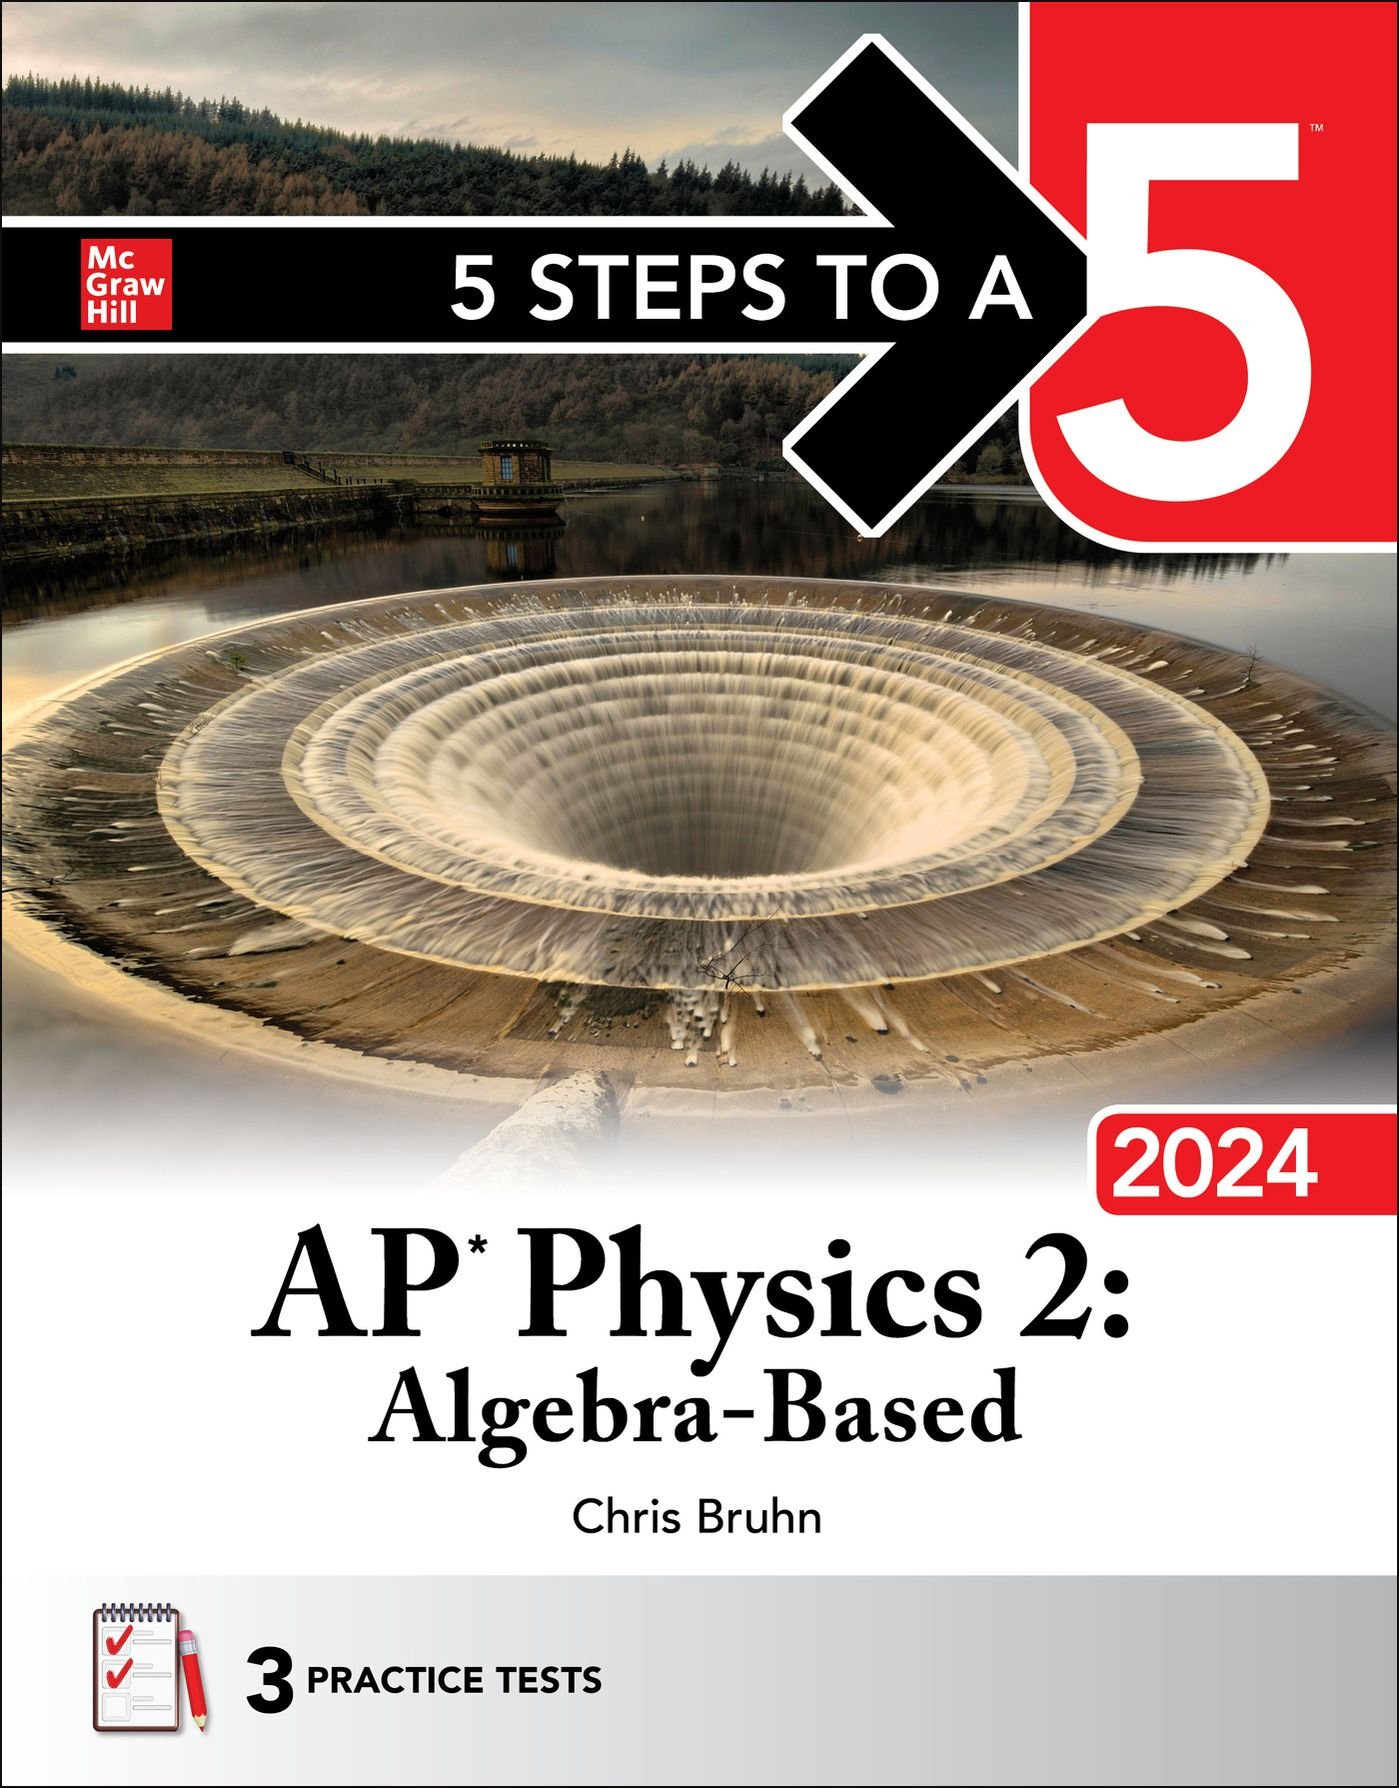 5 Steps to a 5 AP Physics 2 AlgebraBased 2024 SoftArchive